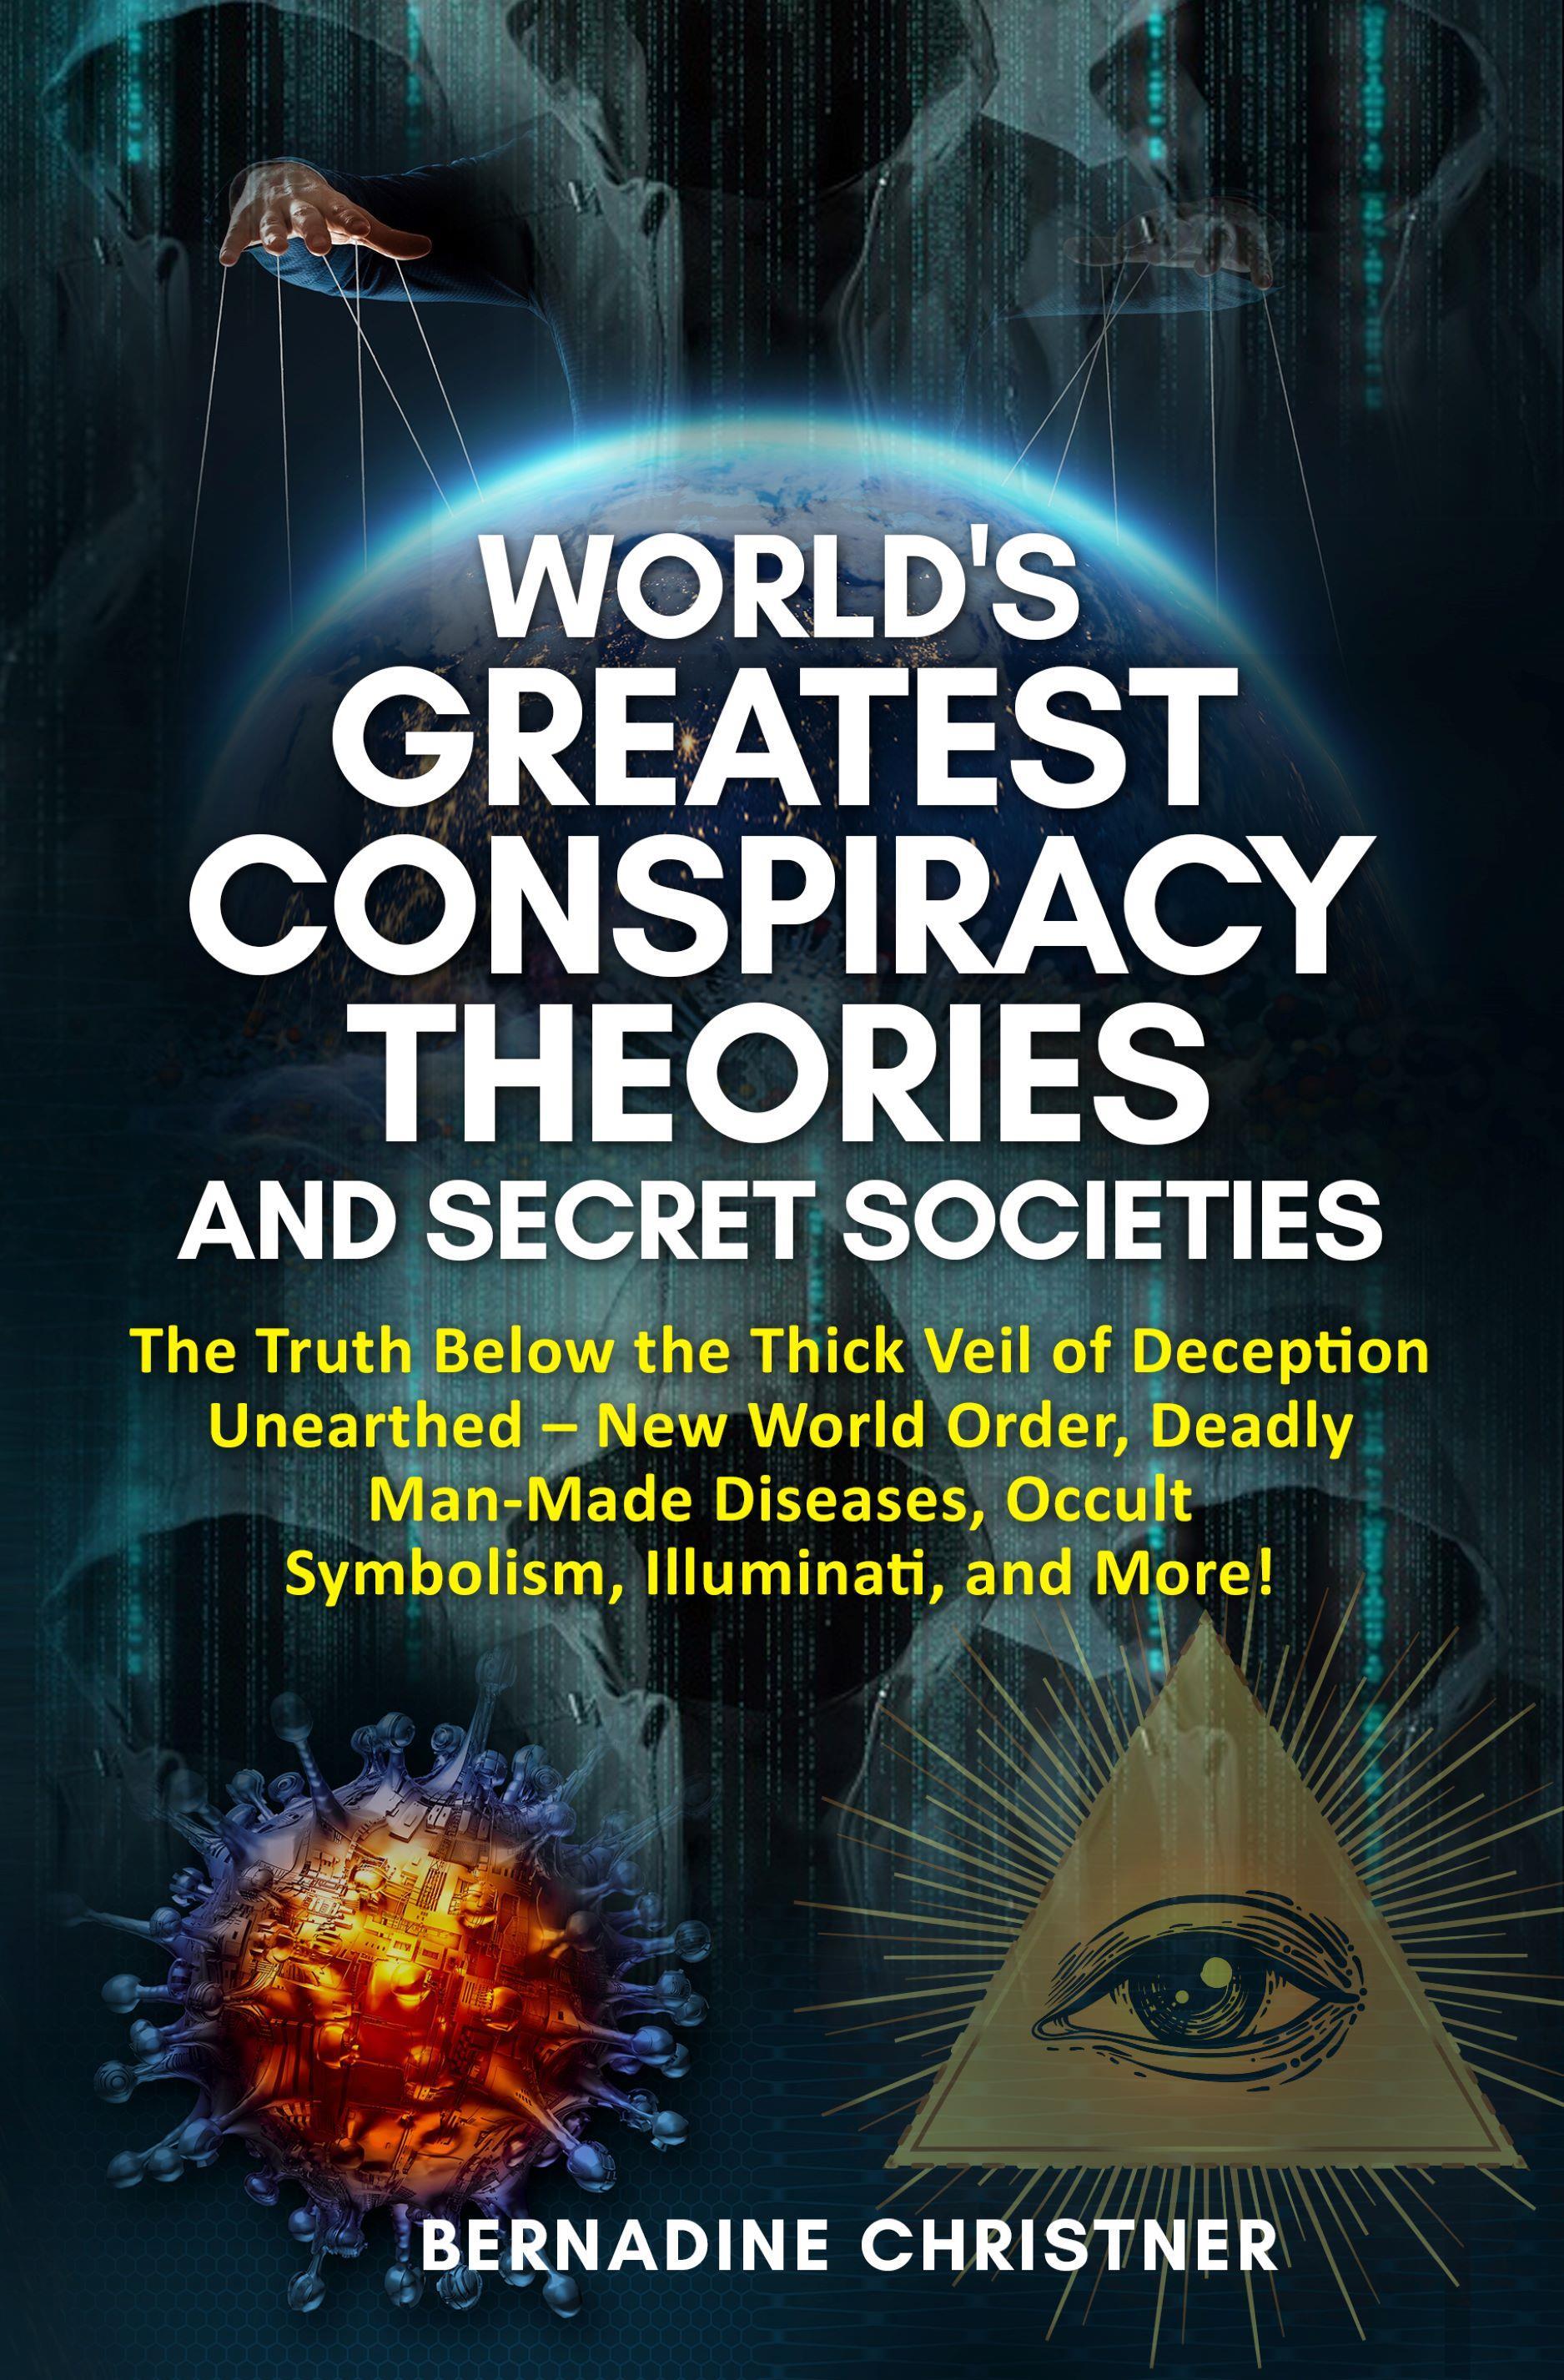 World's greatest conspiracy theories and secret societies